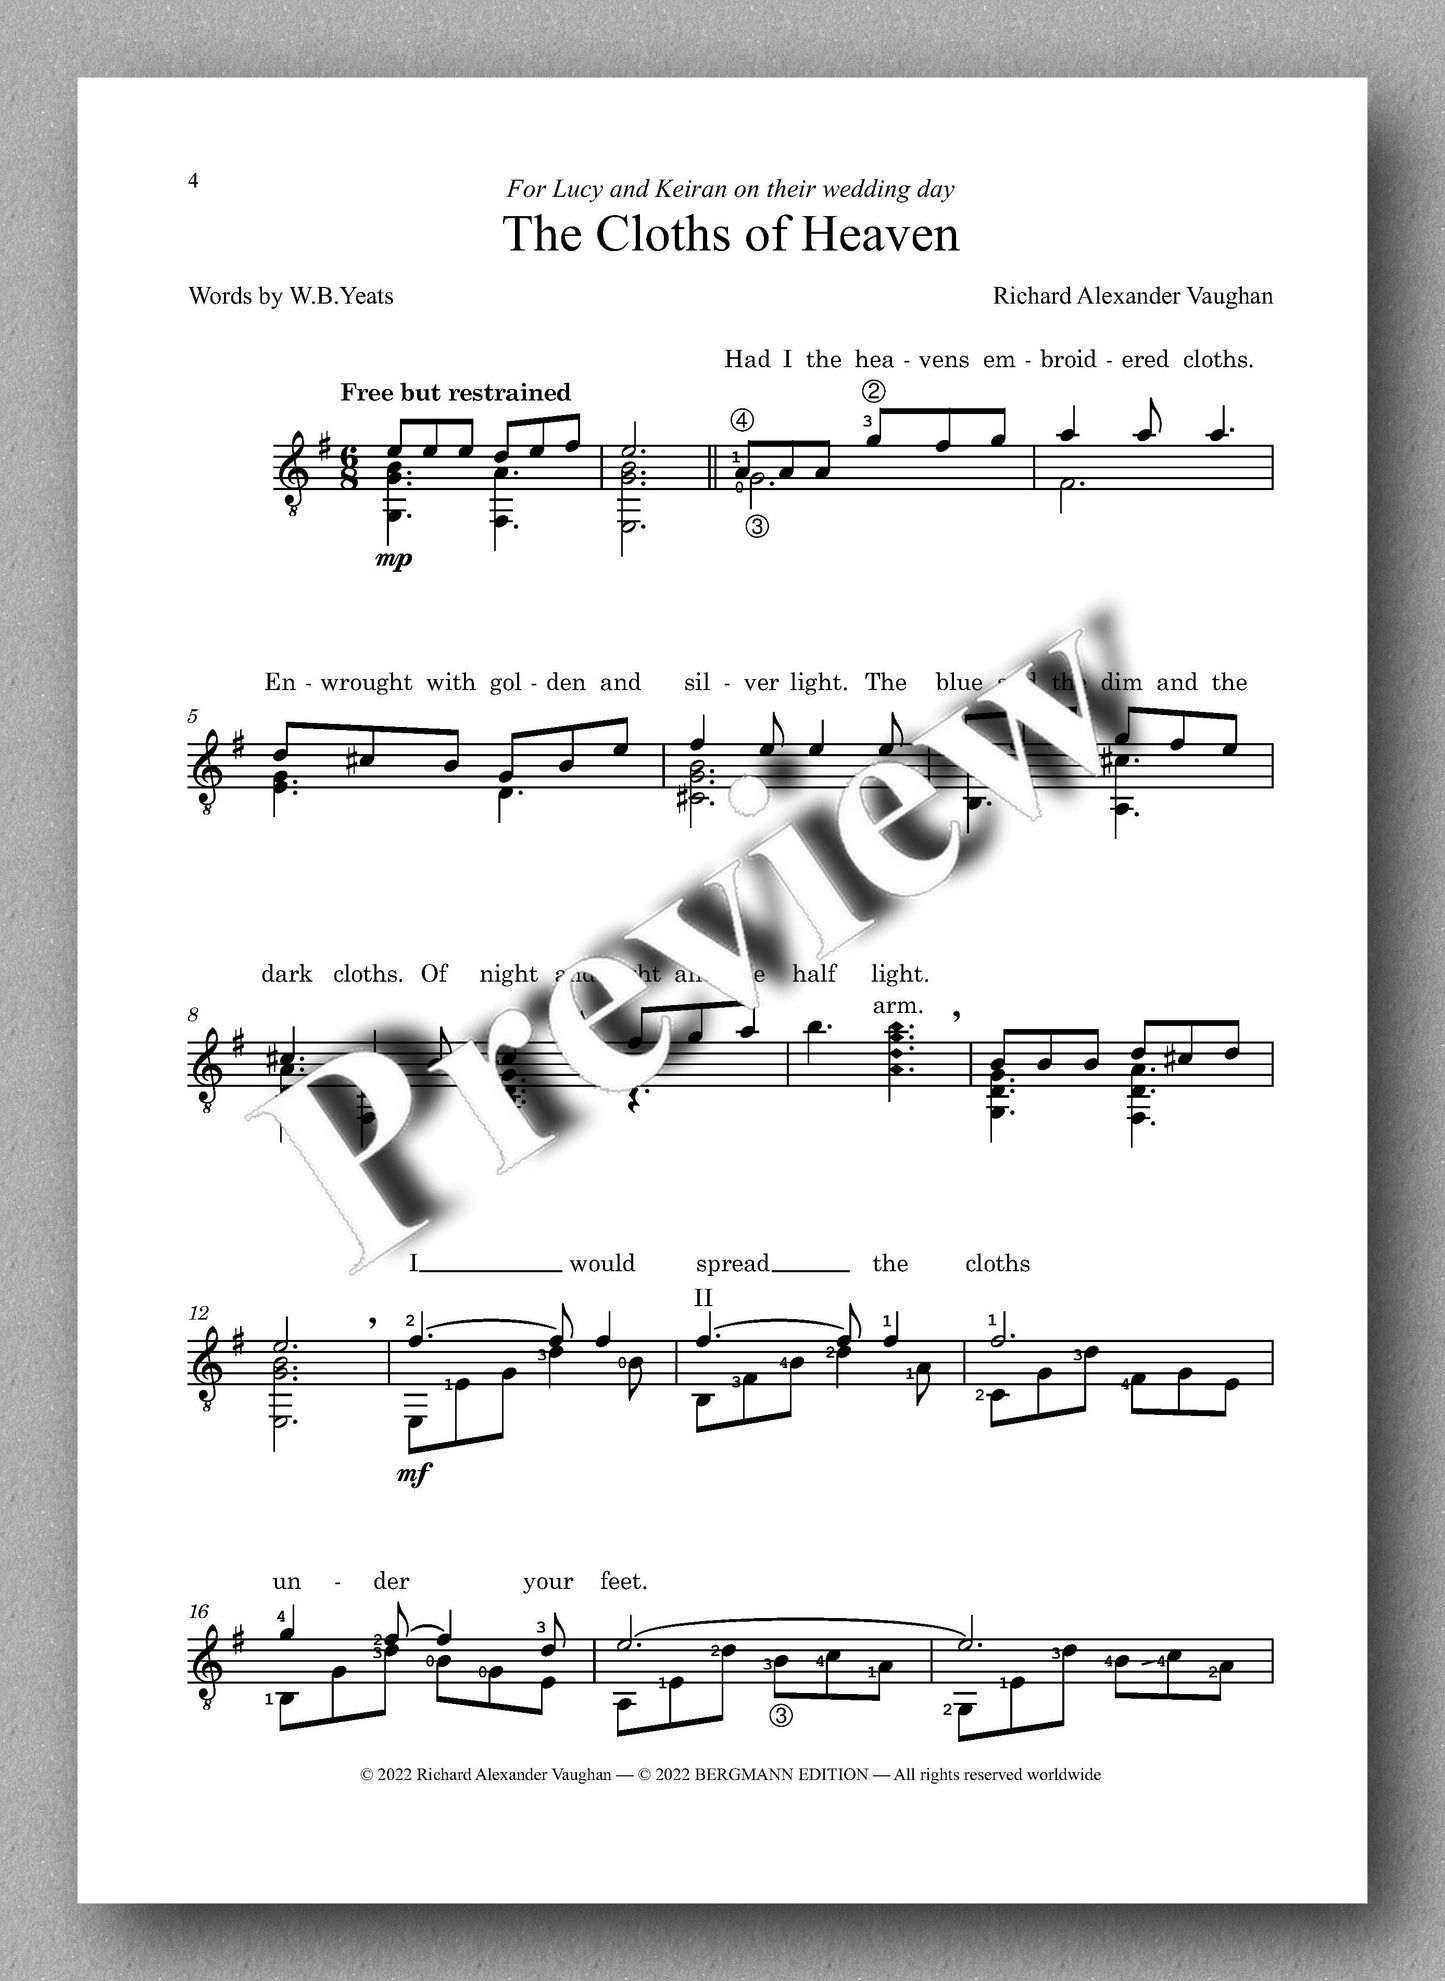 The Cloths of Heaven by Richard Vaughan - preview of the music score